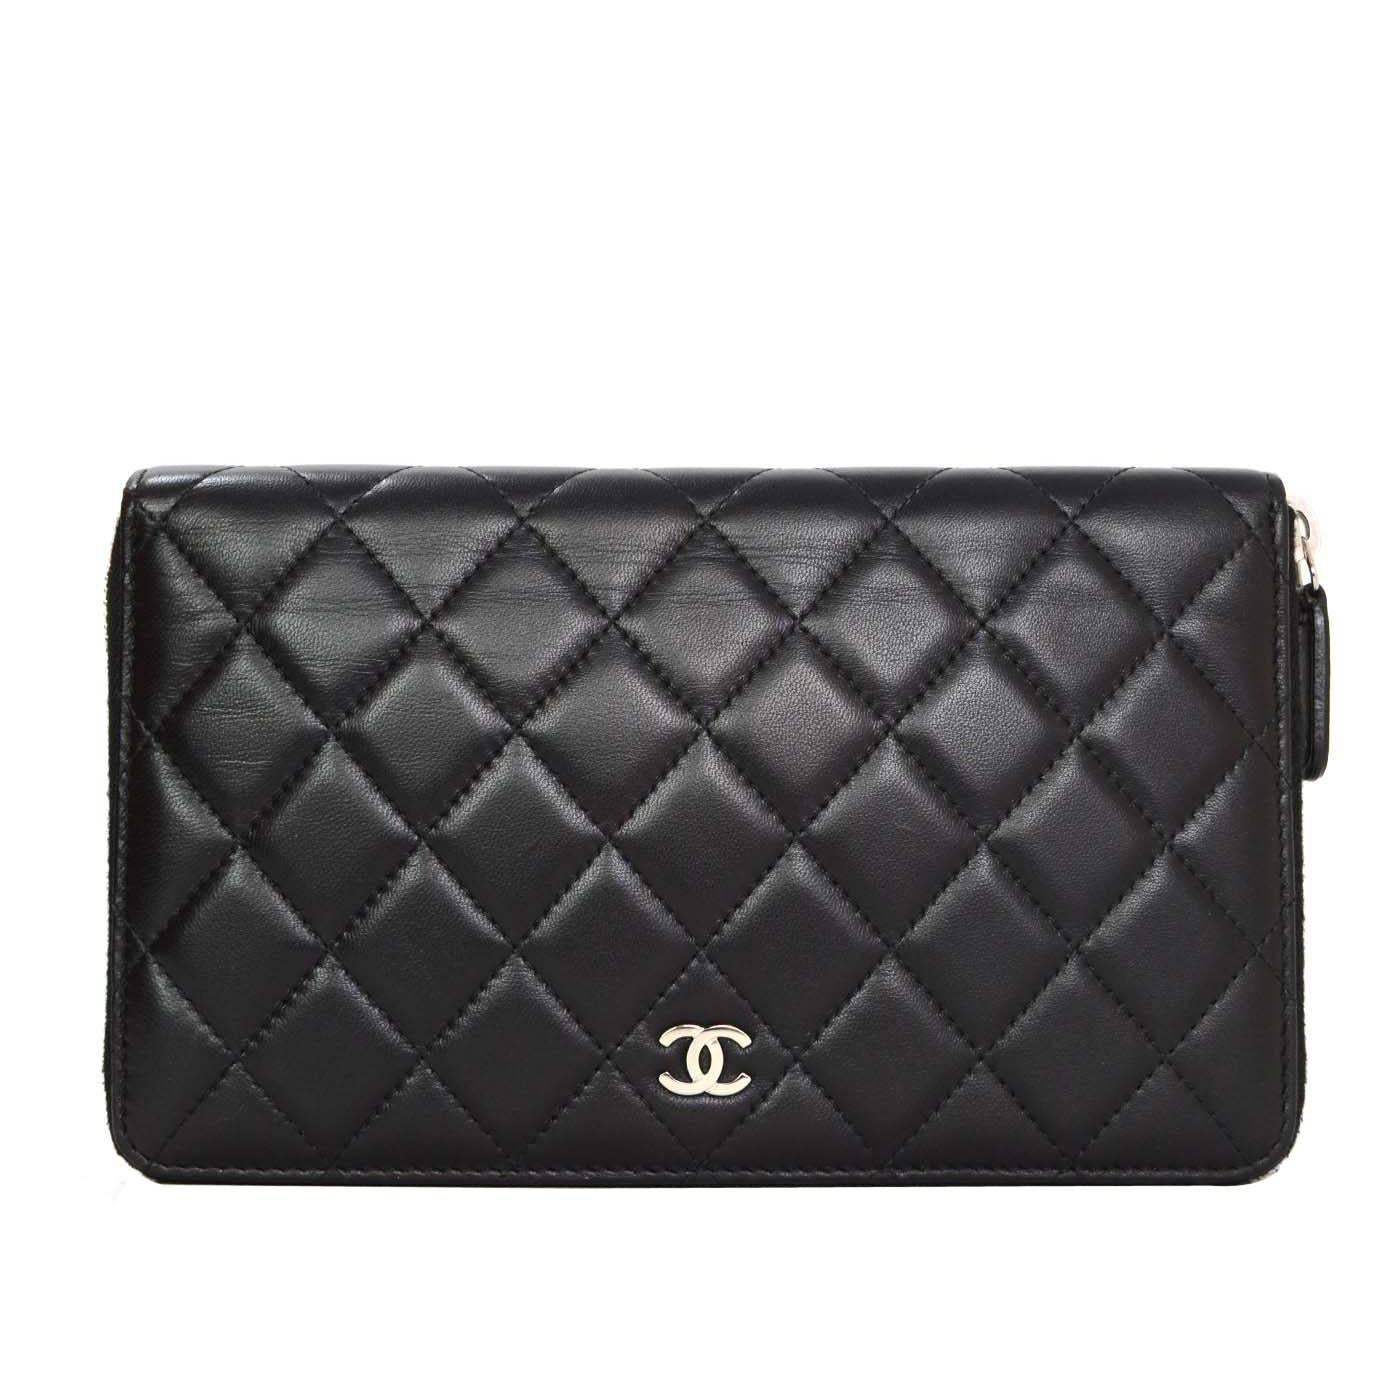 Chanel Black Lambskin Quilted Large Zip Wallet SHW